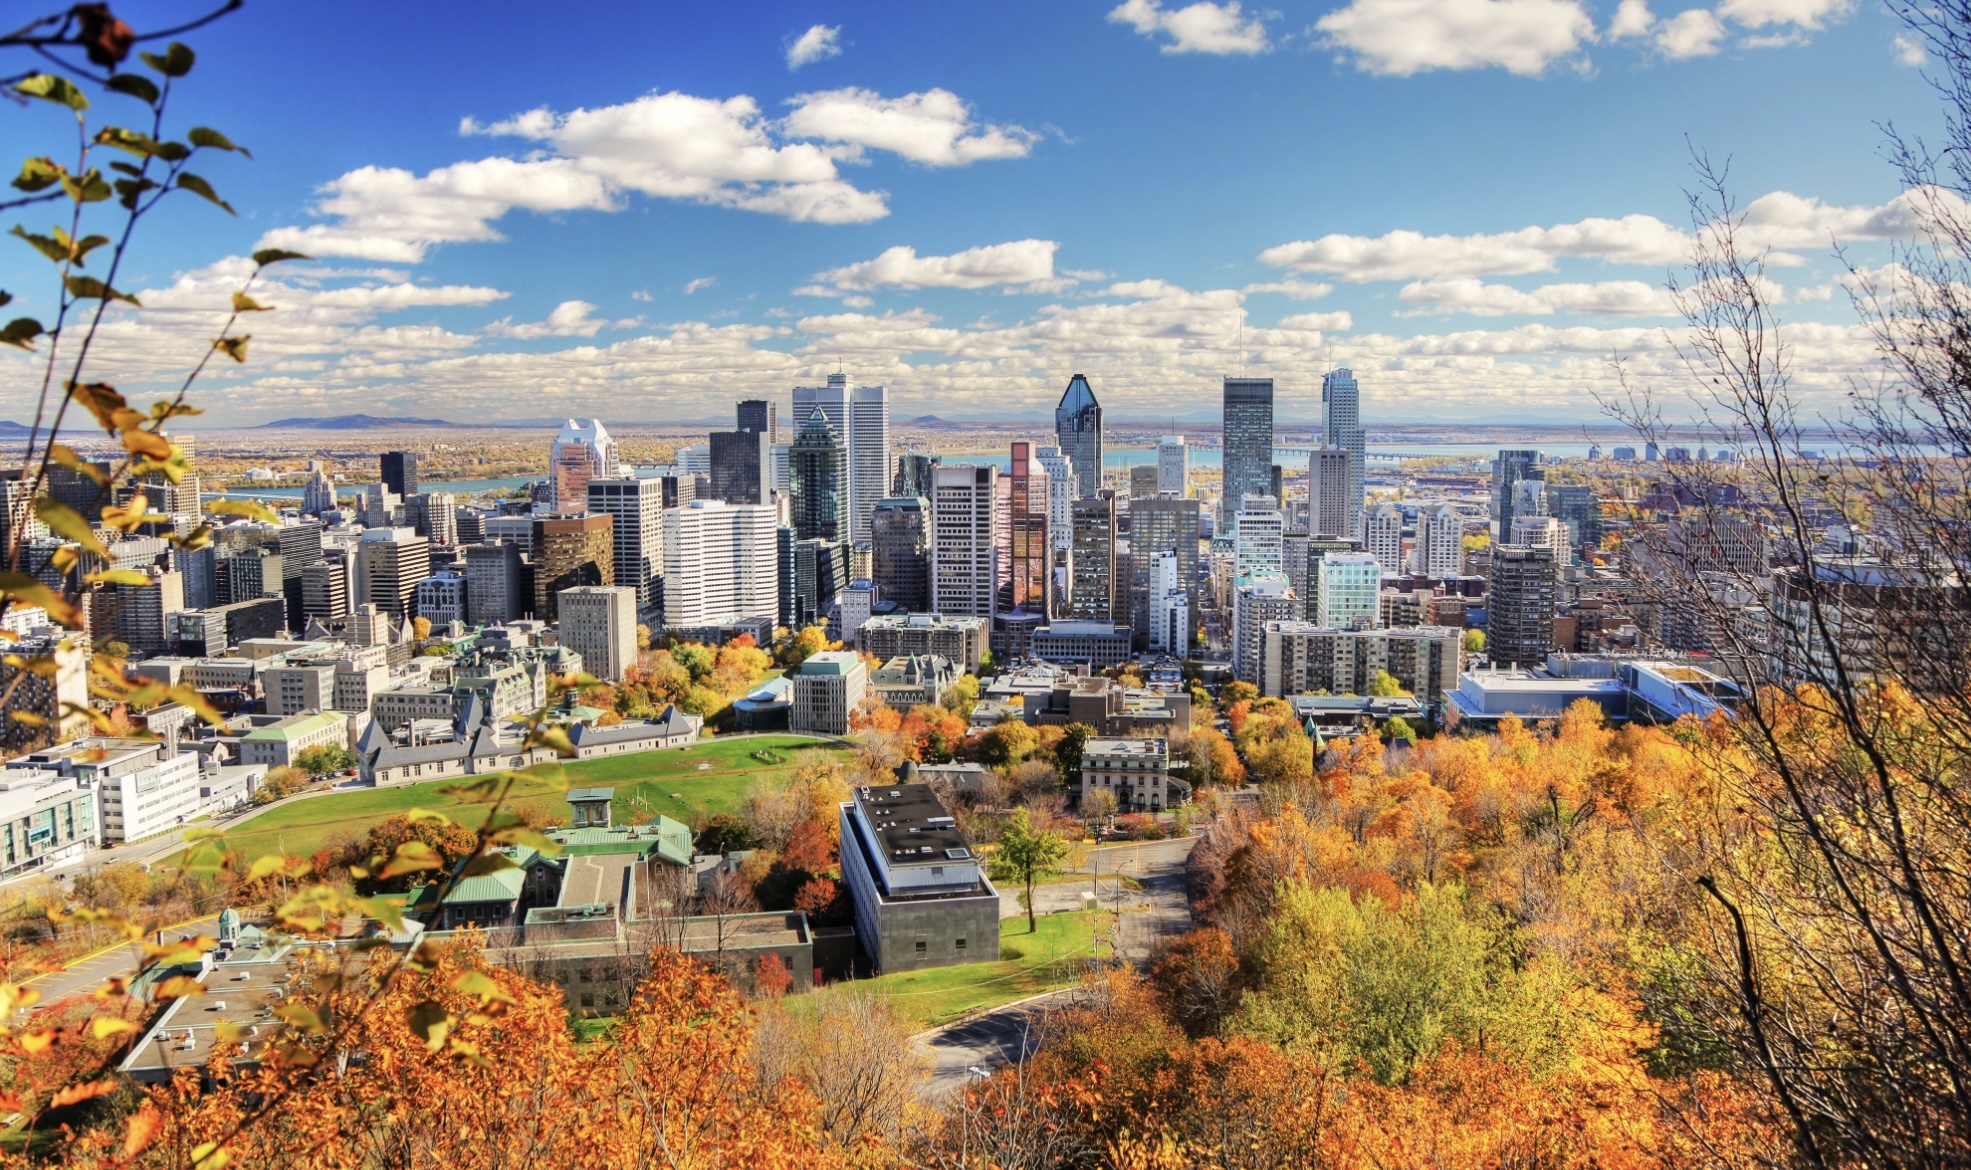 Montreal has been named the second safest city in the world for travel